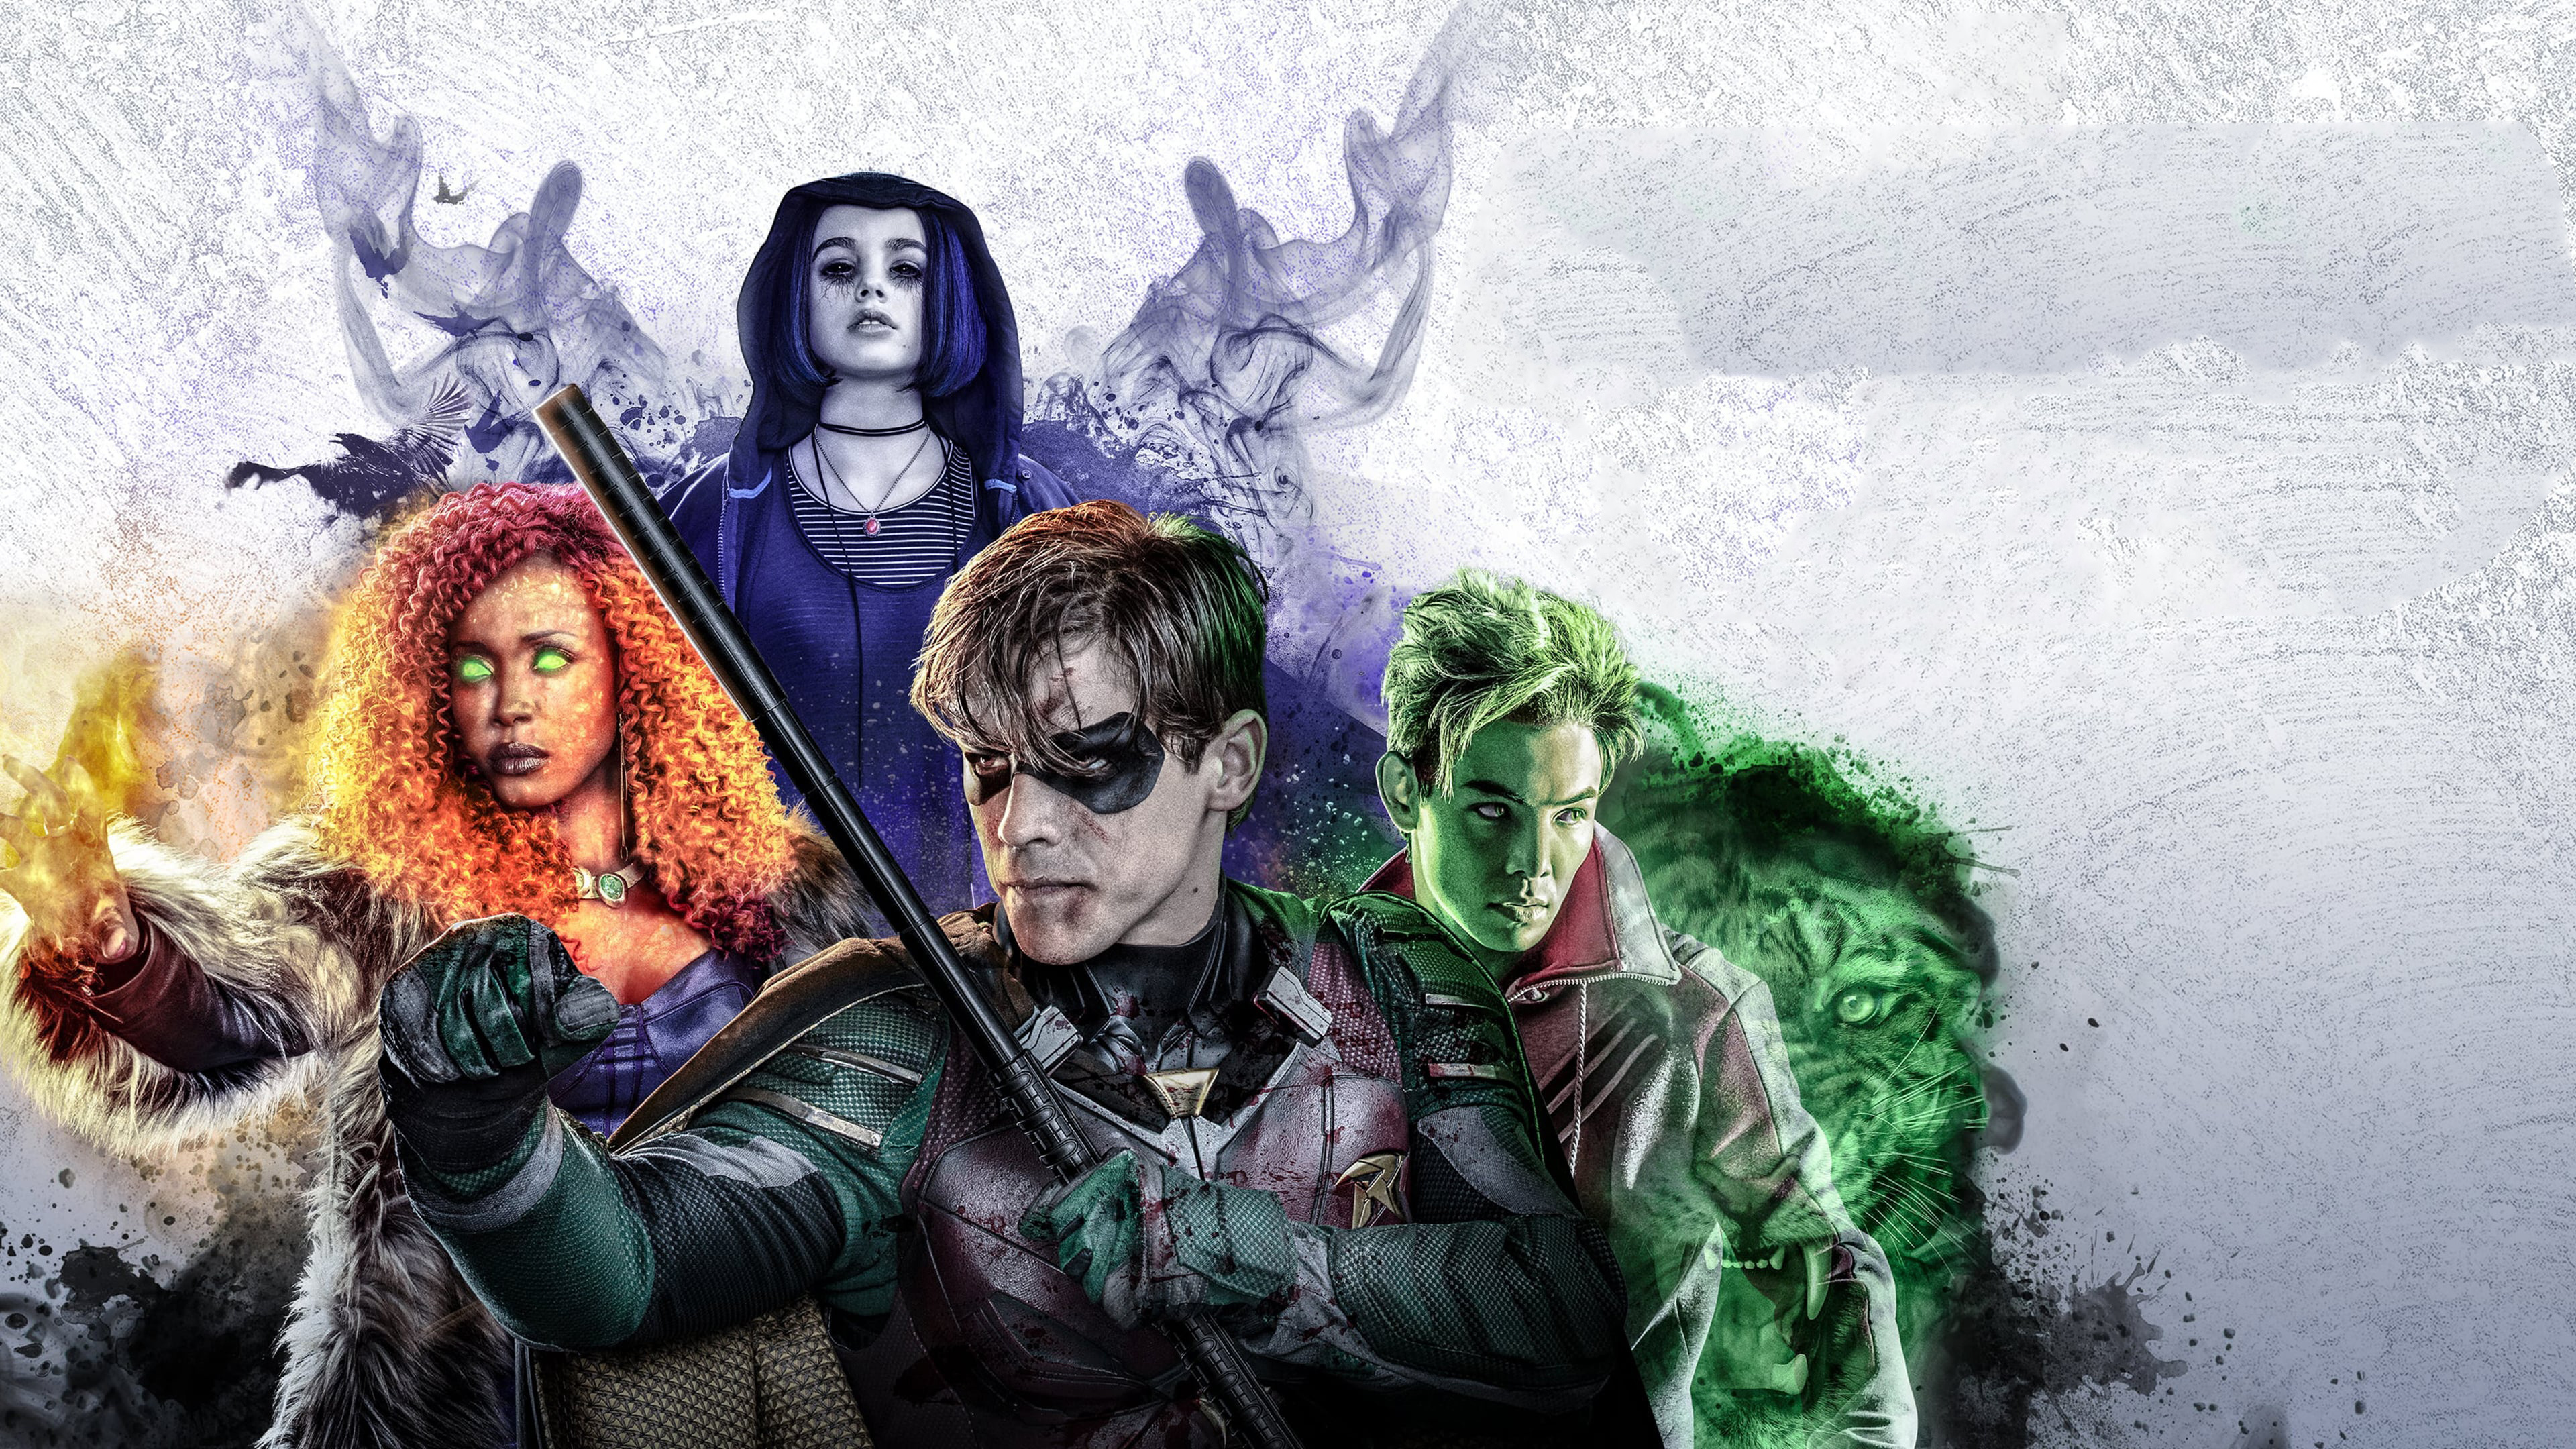 Titans TV series, HD wallpapers, Wide variety, Character and team shots, 3840x2160 4K Desktop